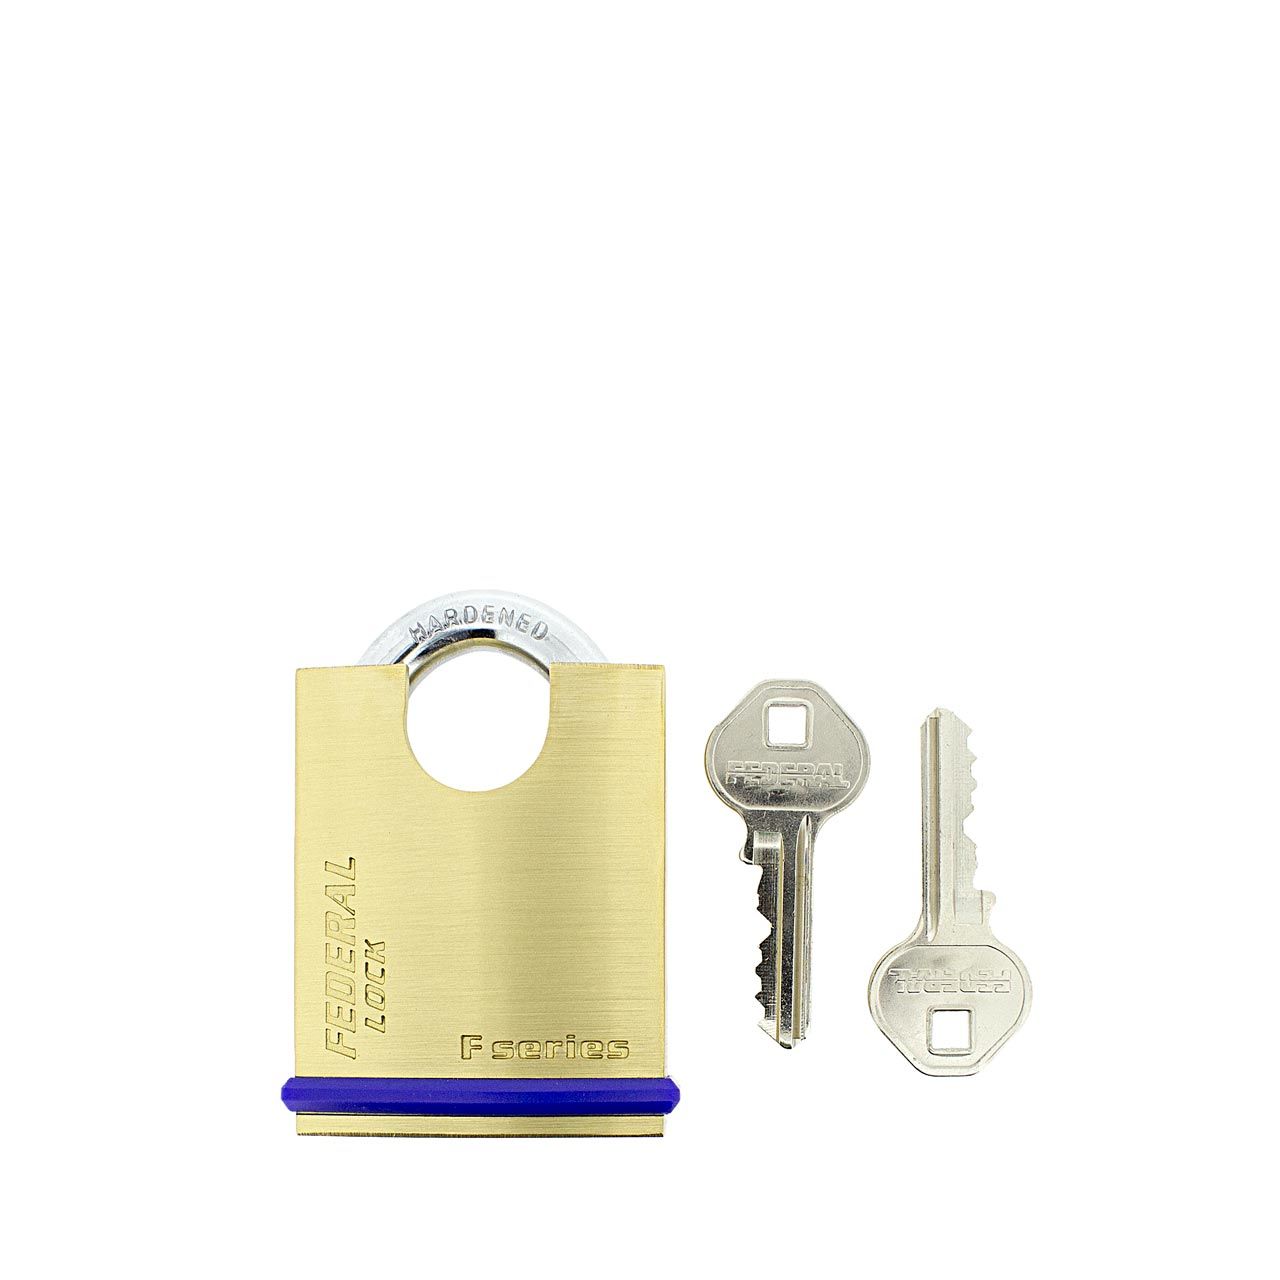 Dimensions Image: Federal 50mm Brass Closed Shackle Padlock